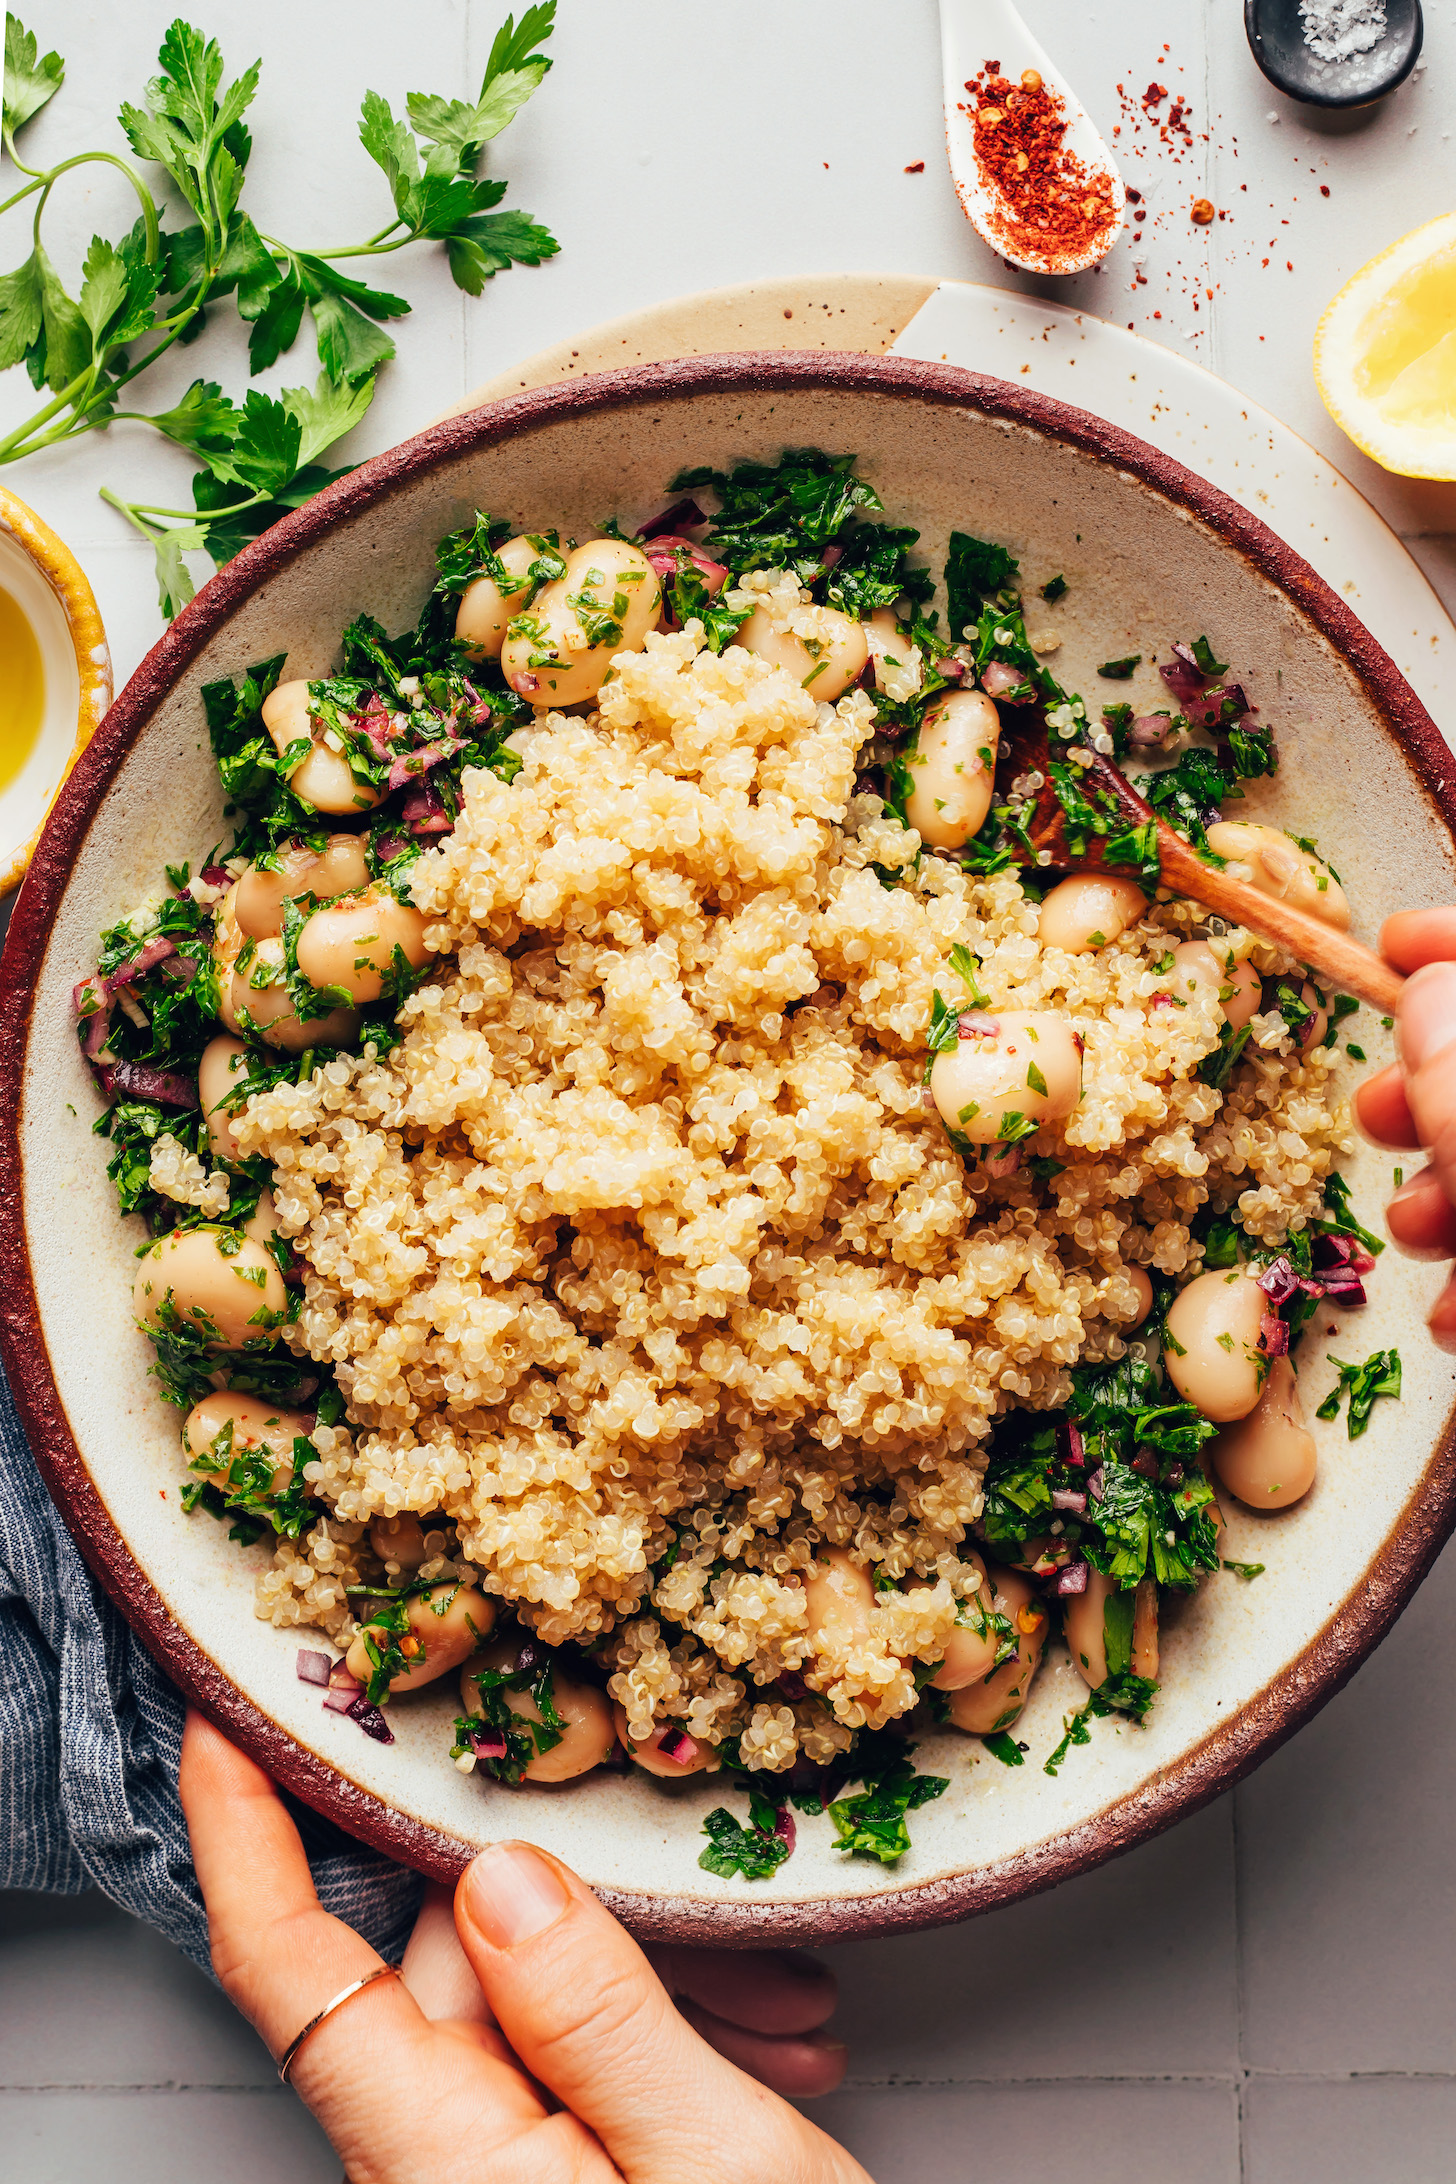 Stirring cooked quinoa with other salad ingredients